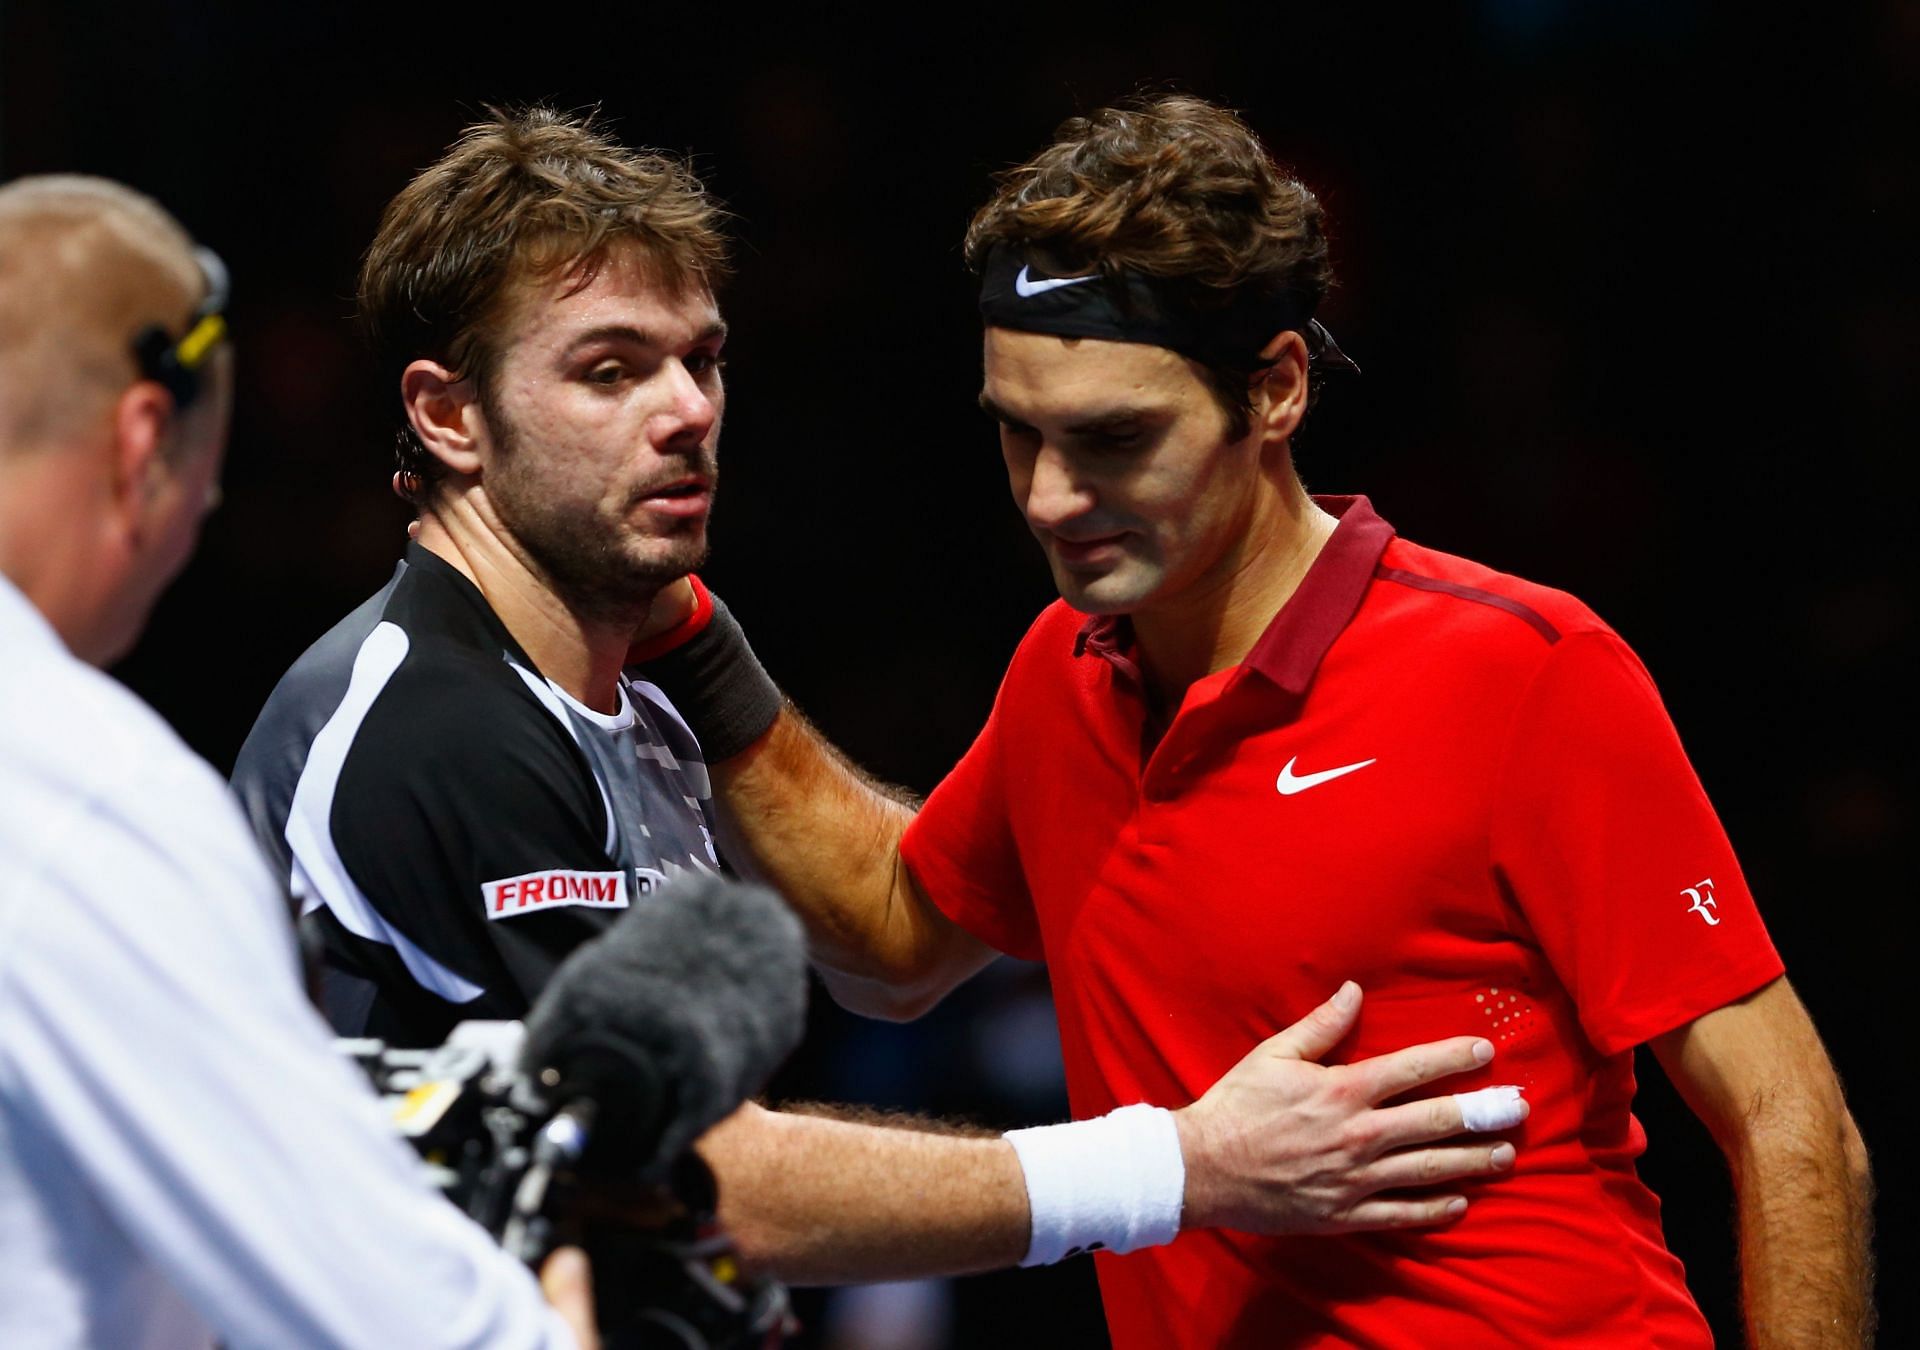 Stan Wawrinka (left) and Roger Federer (right) after their semifinal match in the ATP World Tour Finals in 2014